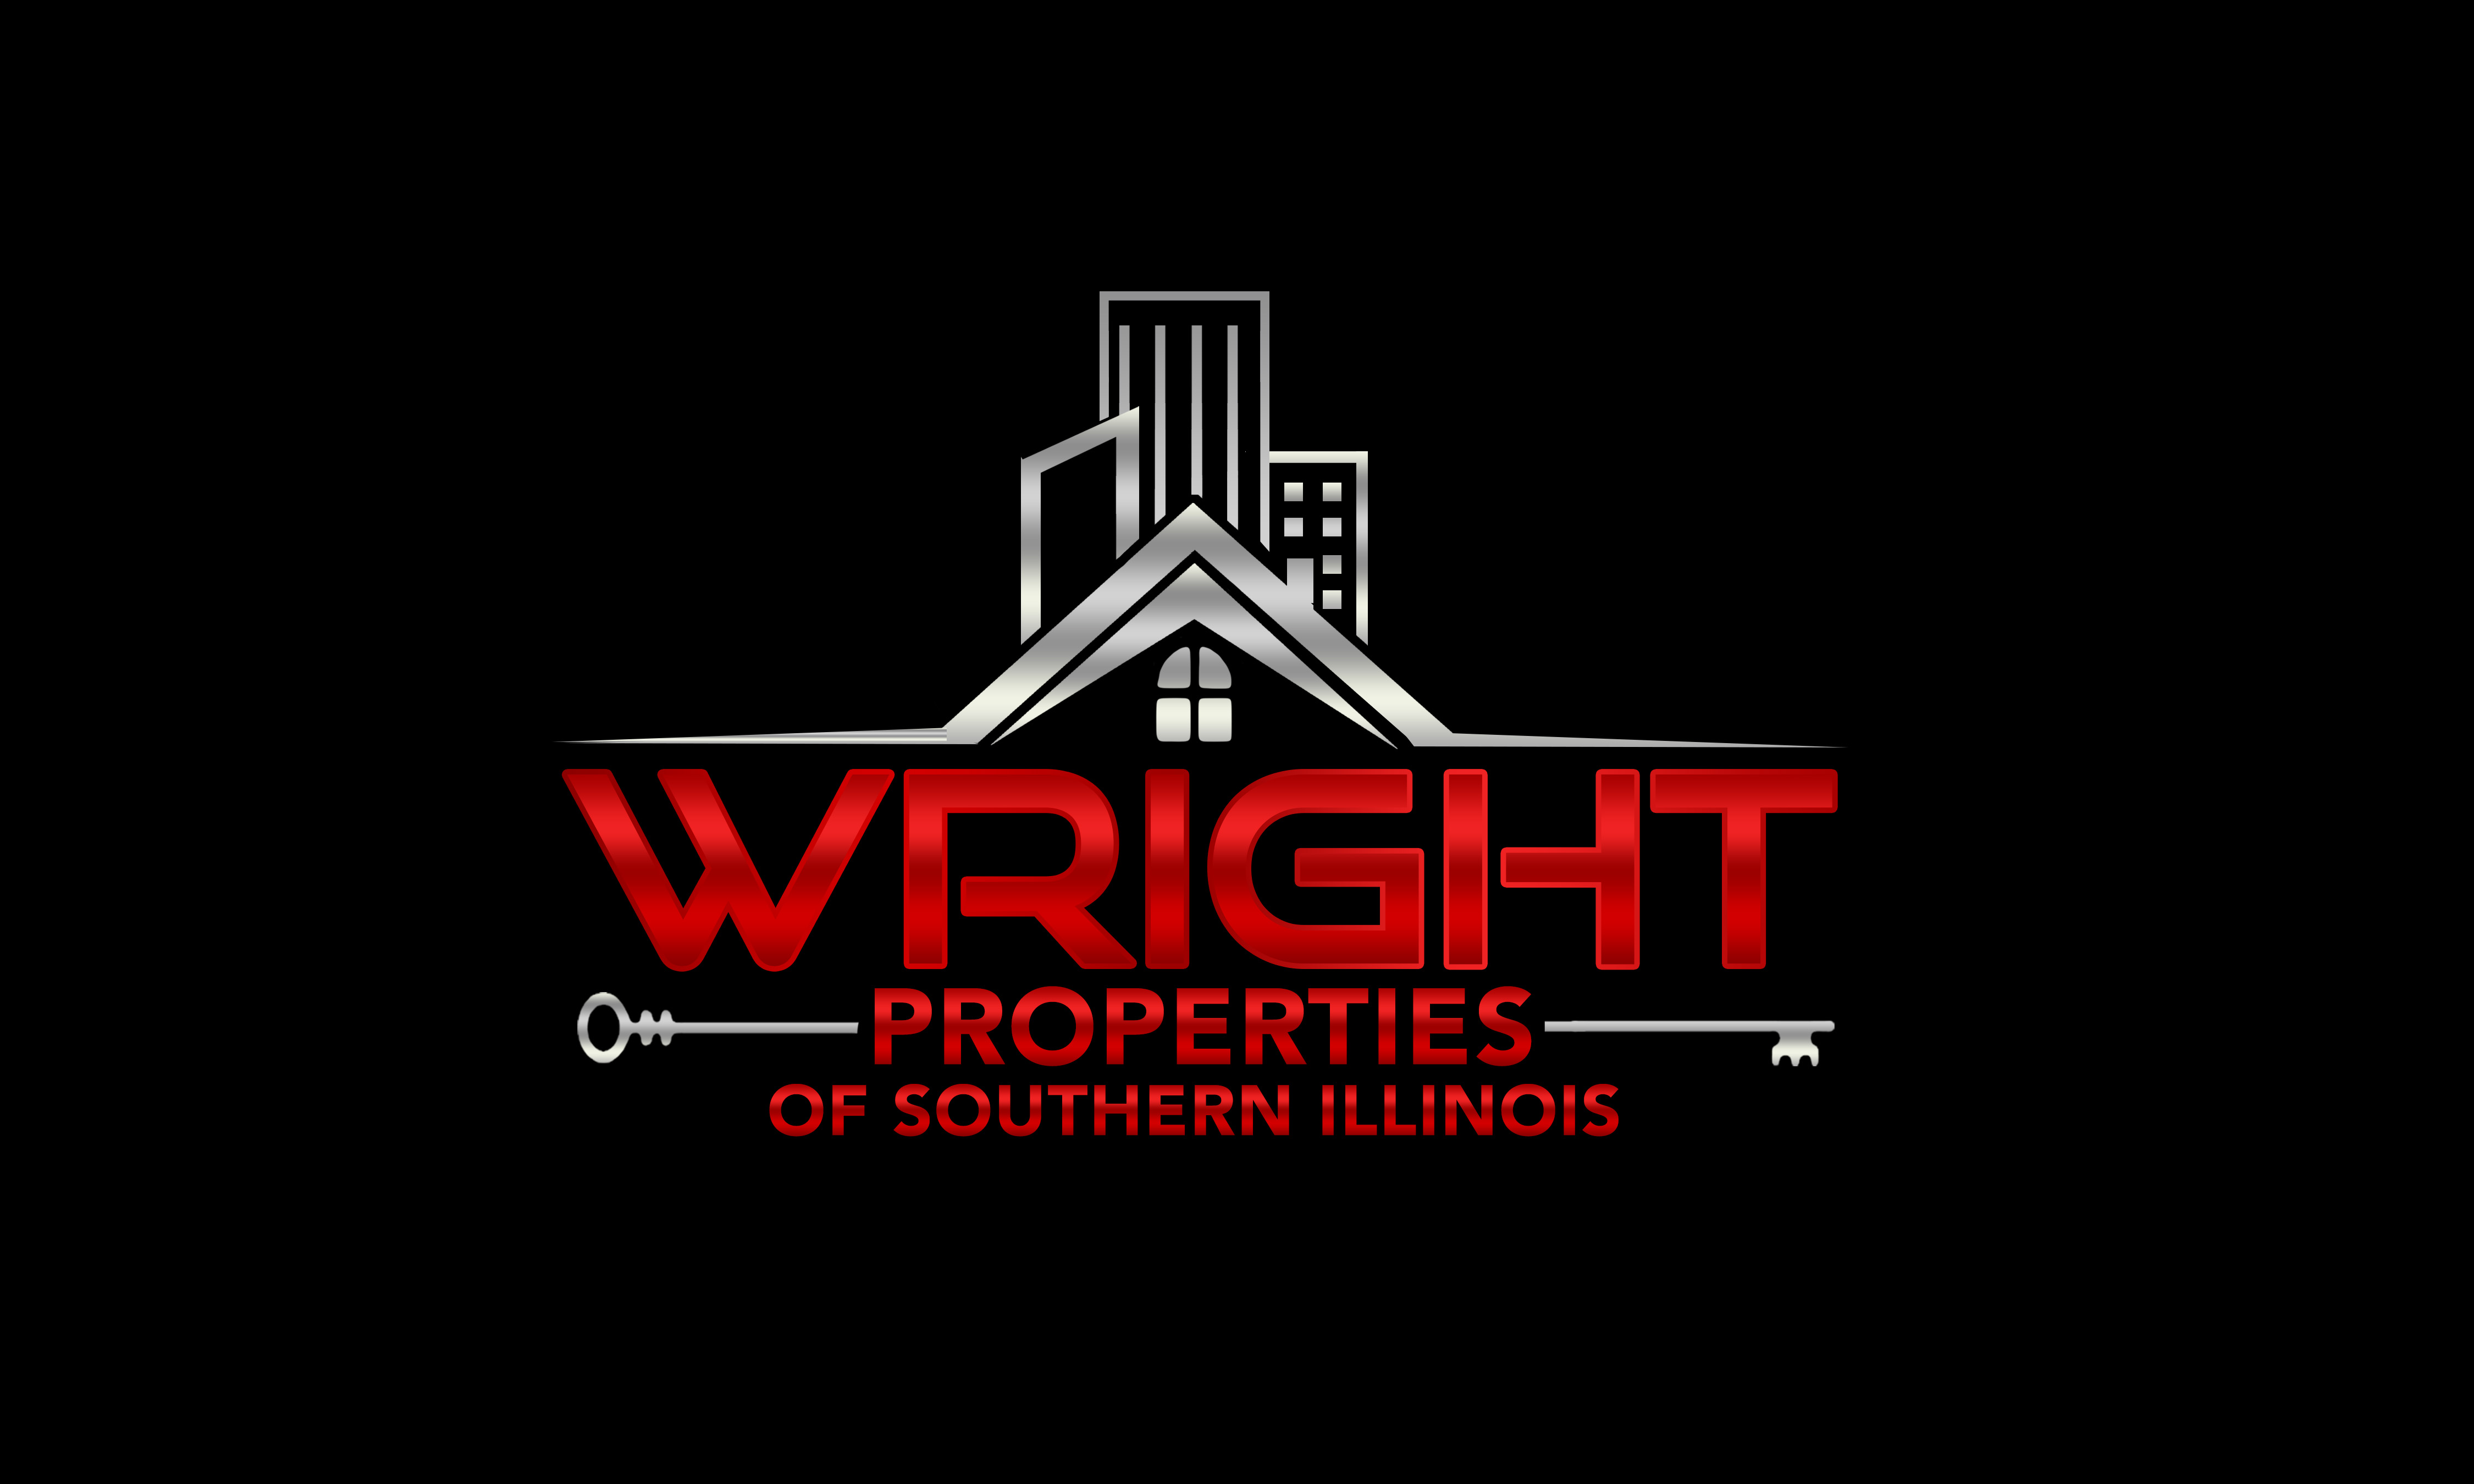 Wright Properties of Southern Illinois